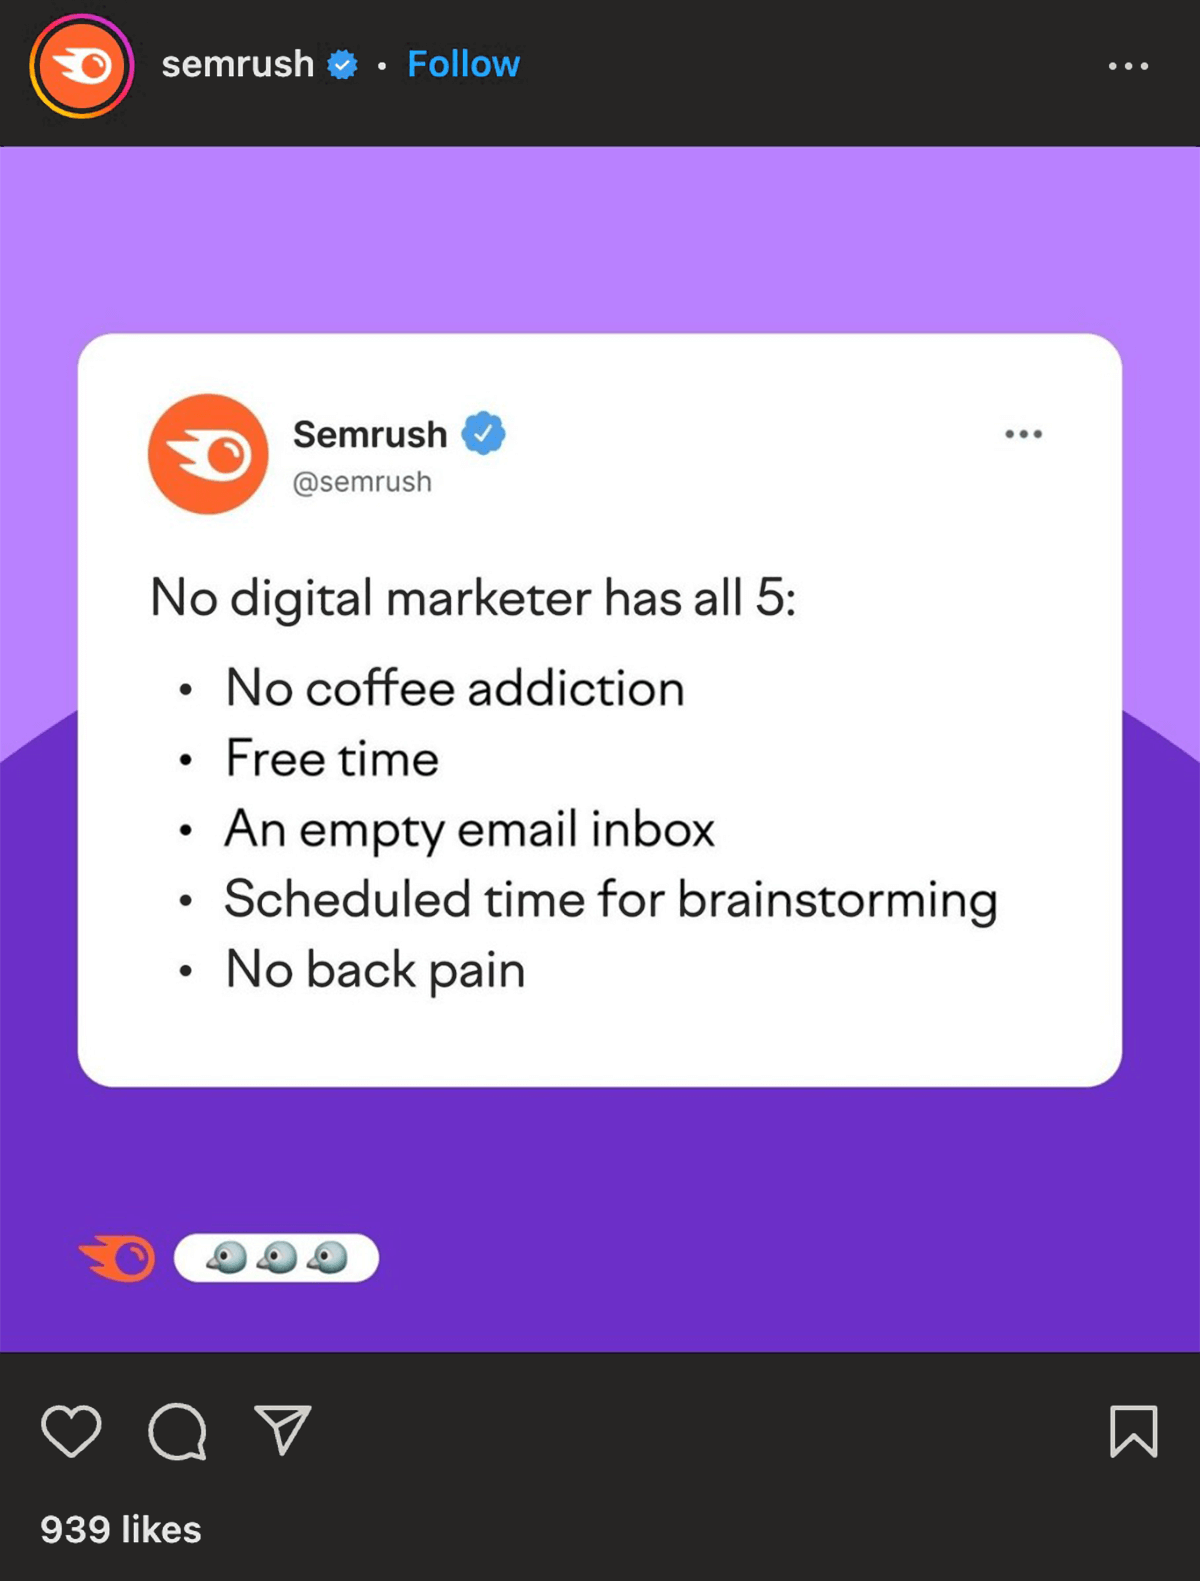 @semrush on Instagram: No digital marketer has all 5: no coffee addiction, free time, an empty email inbox, scheduled time for brainstorming, no back pain